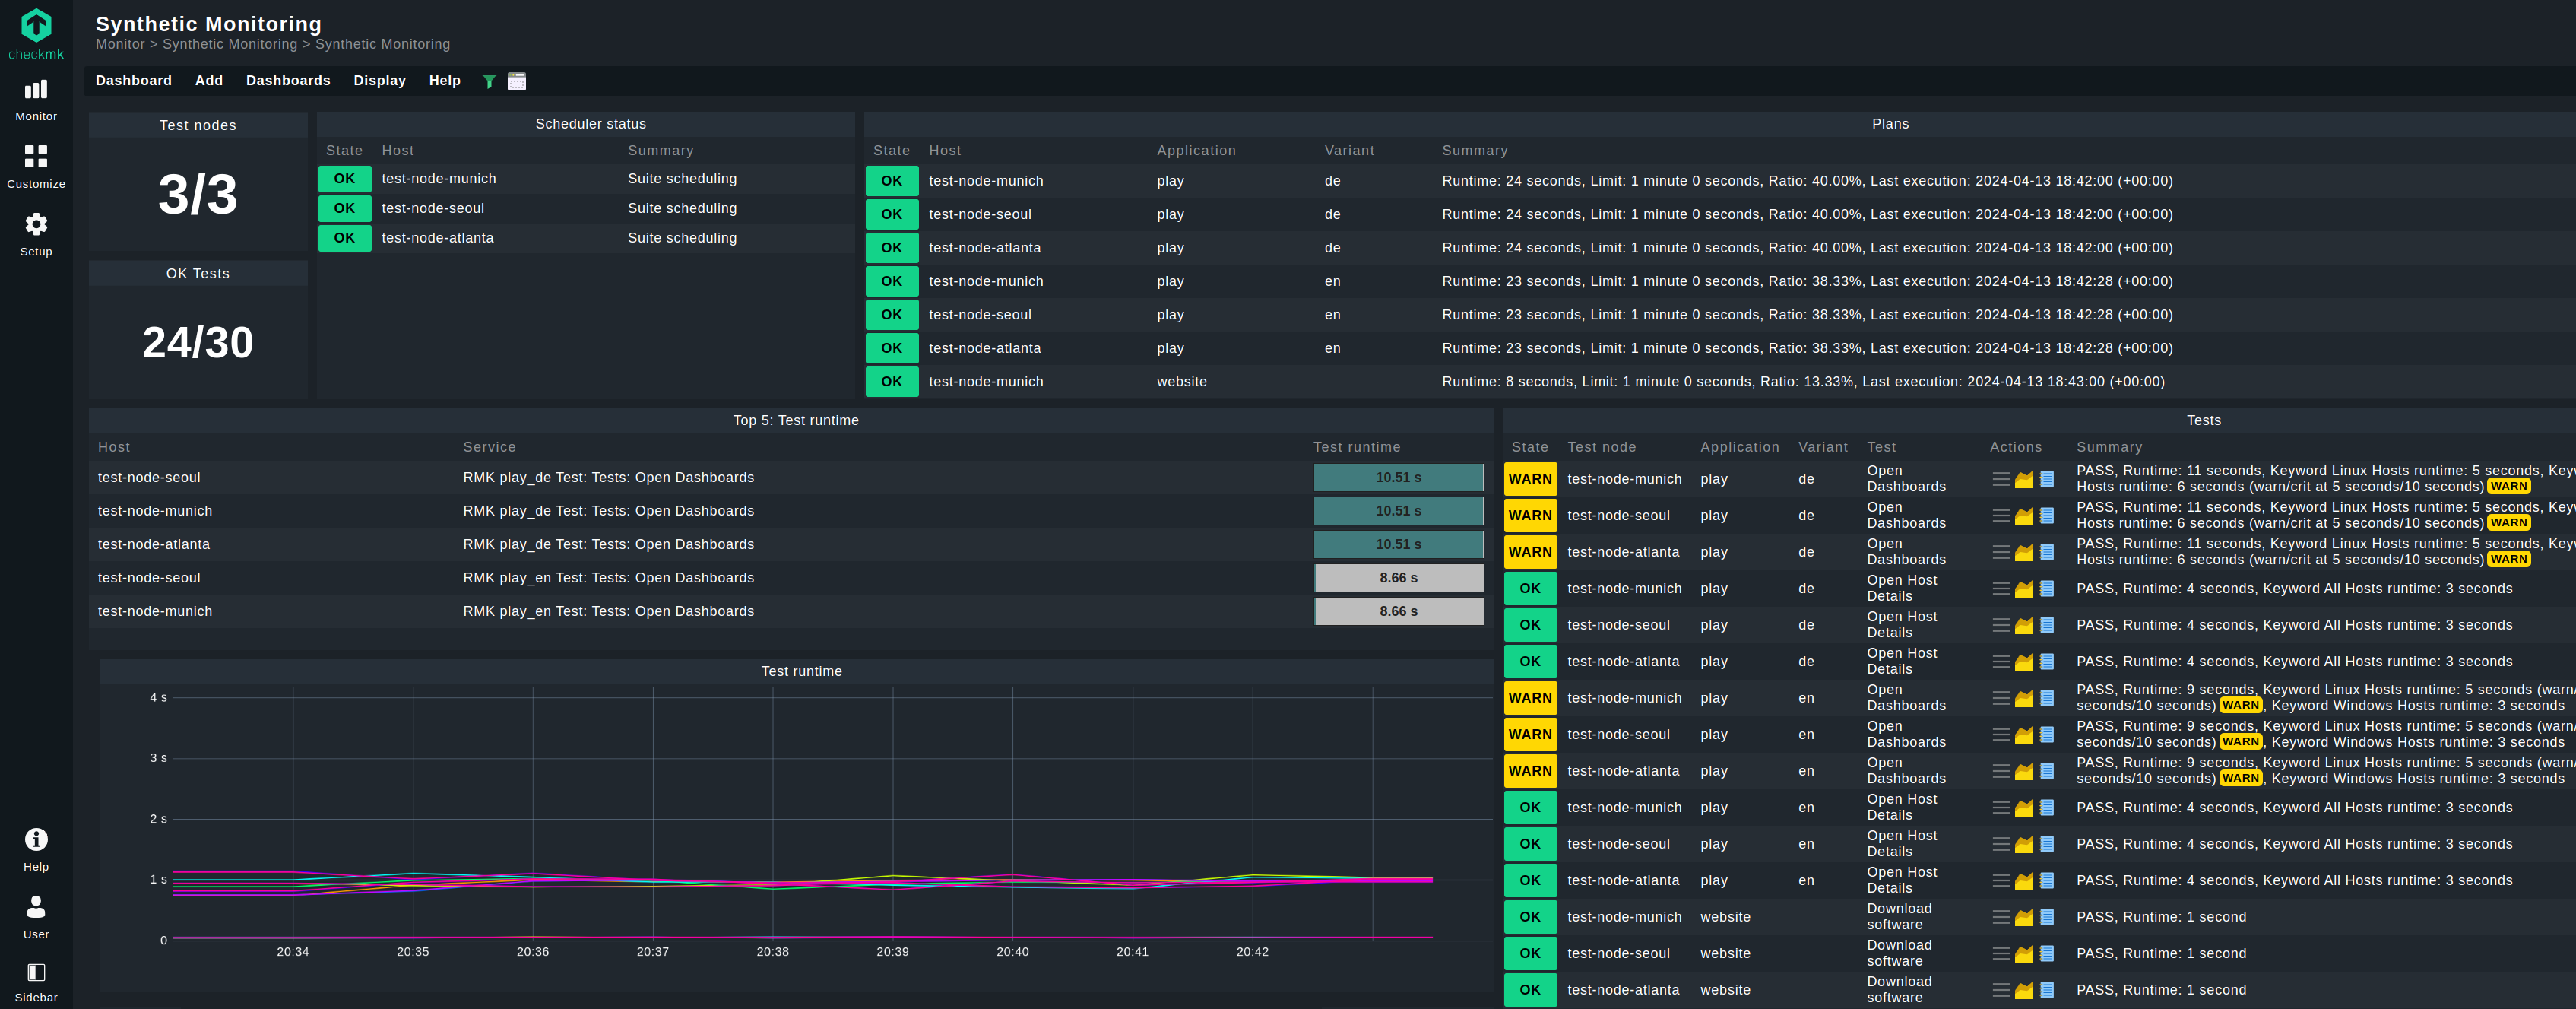 Synthethic Monitoring dashboard in Checkmk